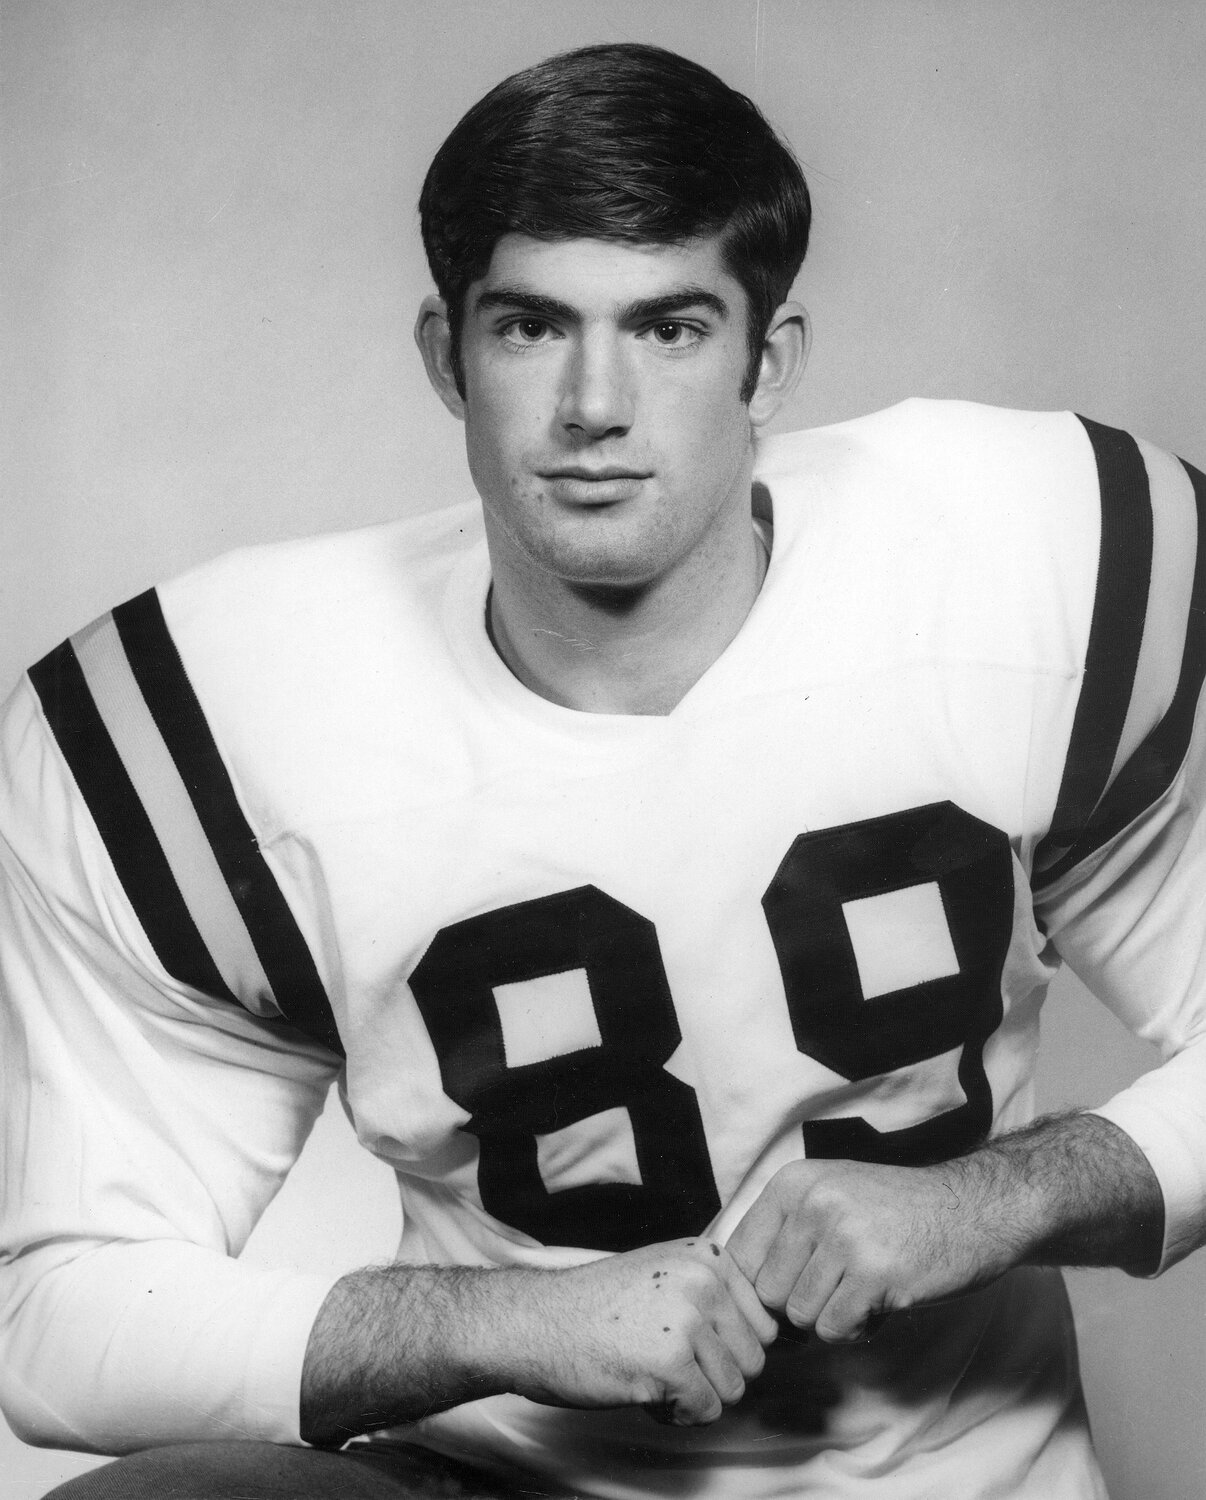 A CHANGE IN NUMBER? Actually, Joe wore jersey 60 on the team, but when it came time for his yearbook picture the photographer wanted a cleaner jersey, hence he wore 89.